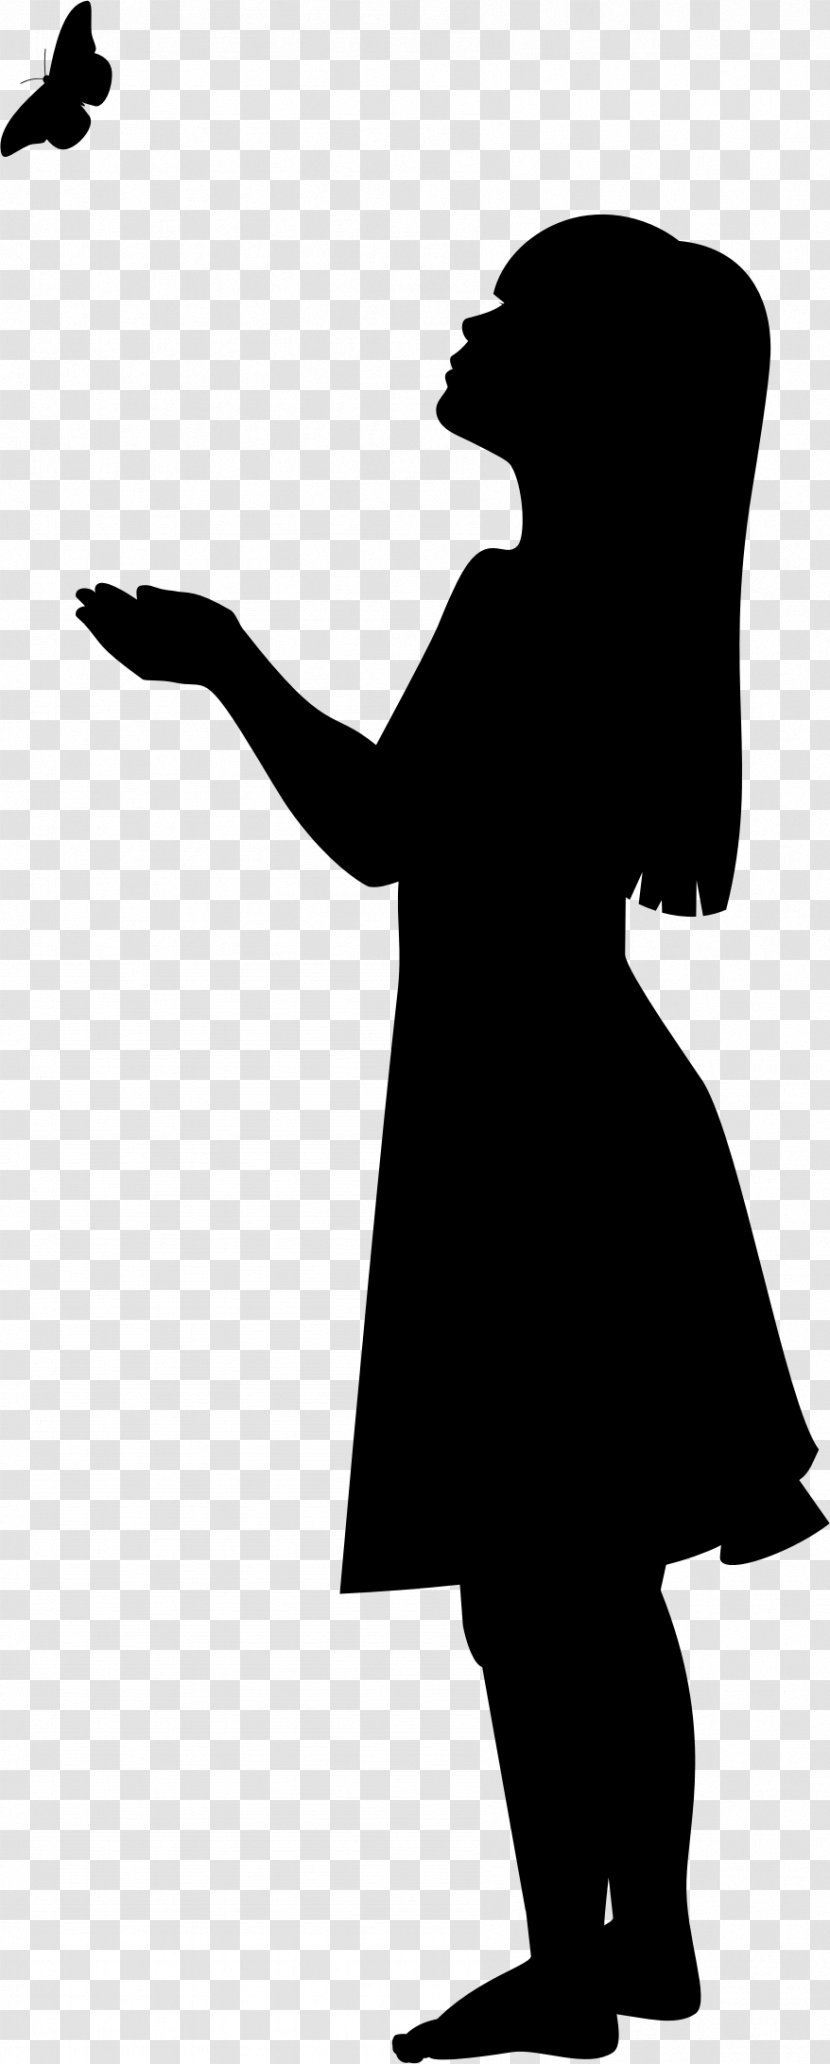 Drawing Child Silhouette Woman - Tree - Break Up Transparent PNG